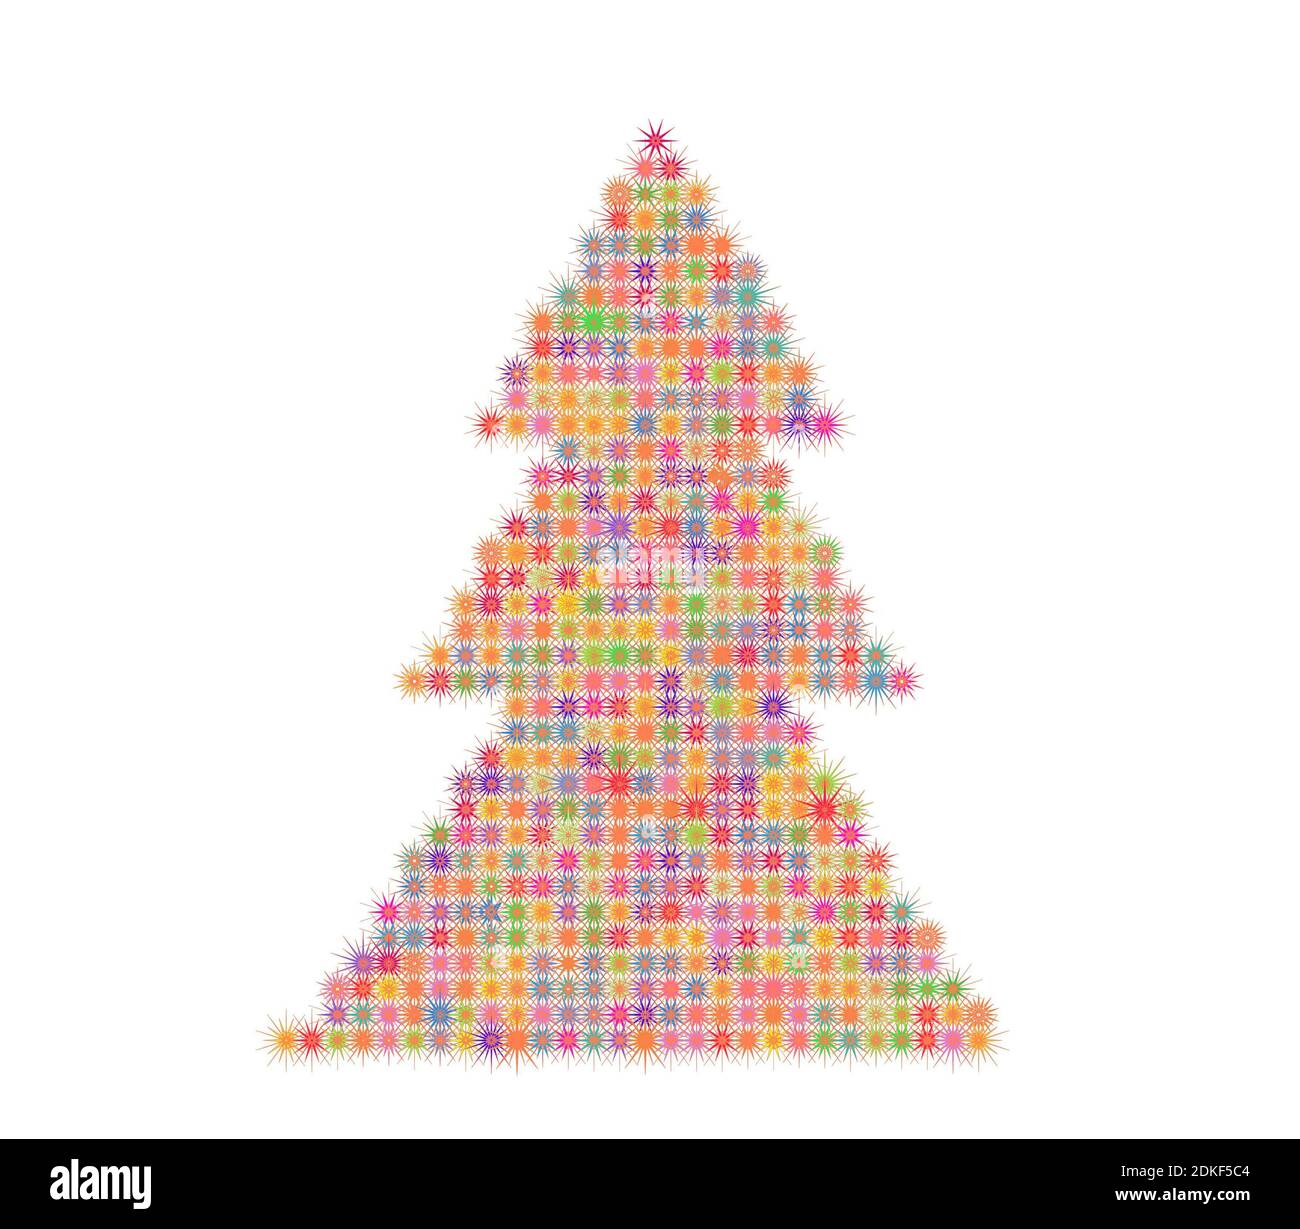 Abstract Christmas Tree Banque D'Images